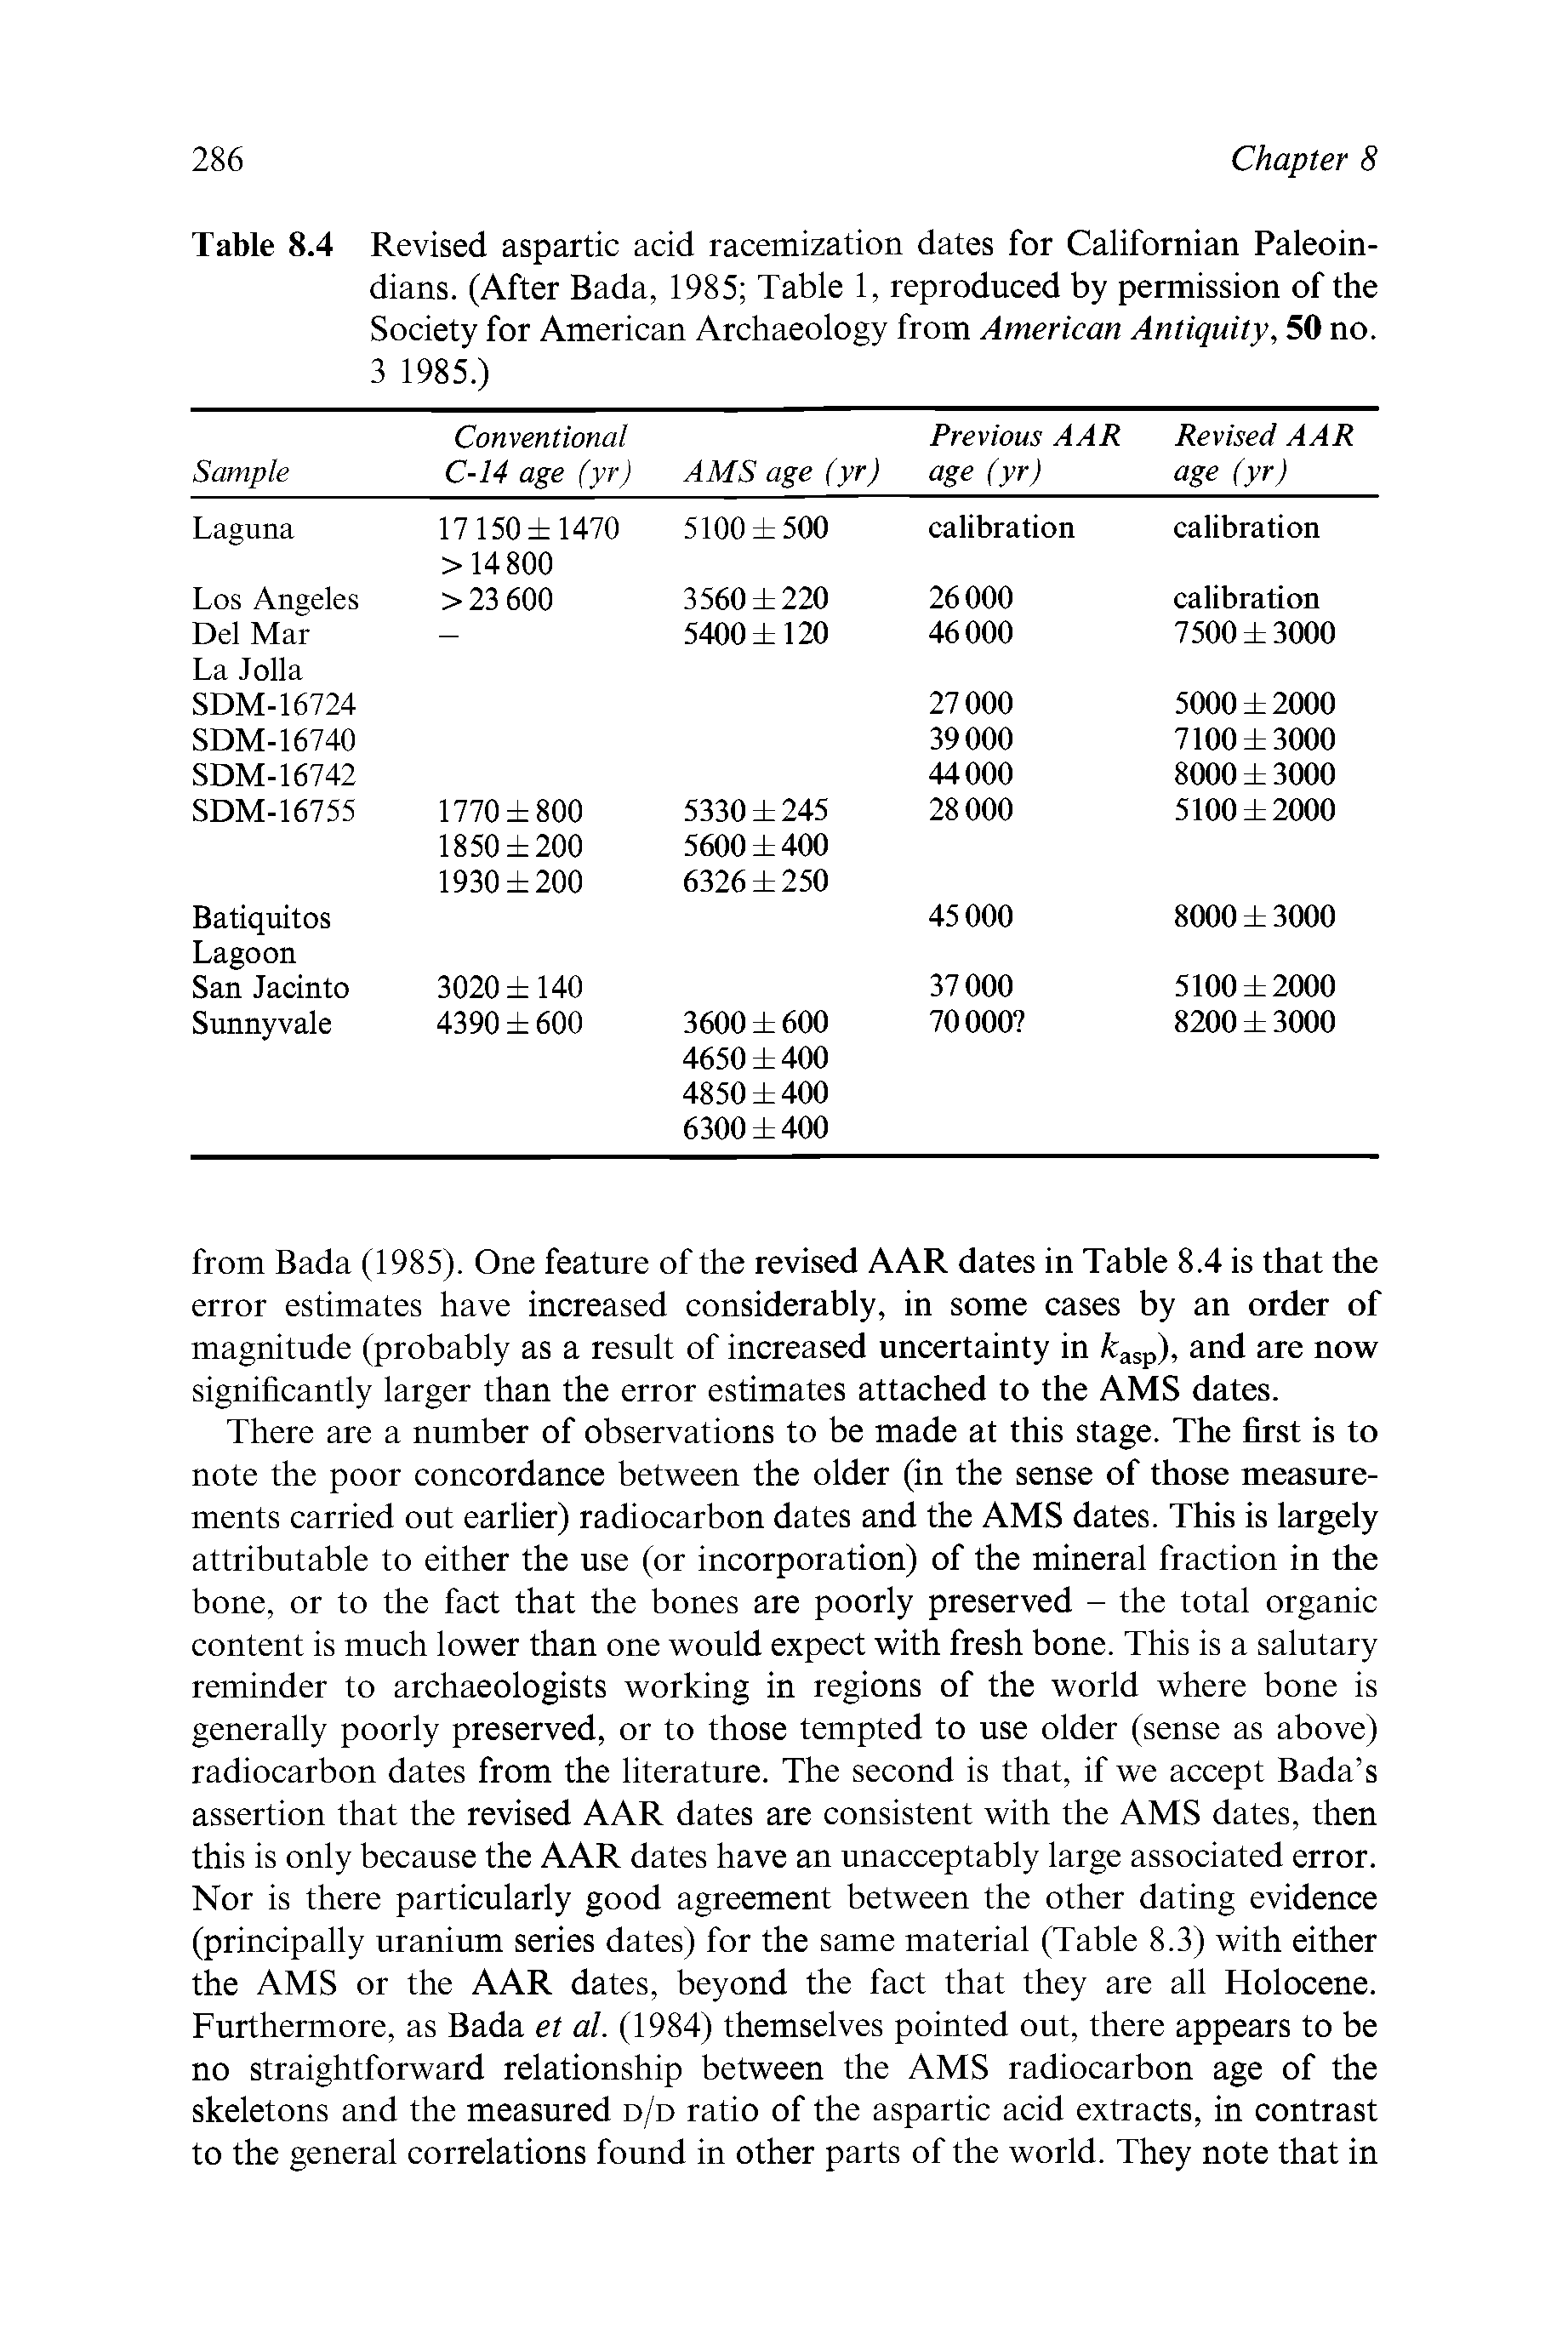 Table 8.4 Revised aspartic acid racemization dates for Californian Paleoin-dians. (After Bada, 1985 Table 1, reproduced by permission of the Society for American Archaeology from American Antiquity, 50 no. 3 1985.)...